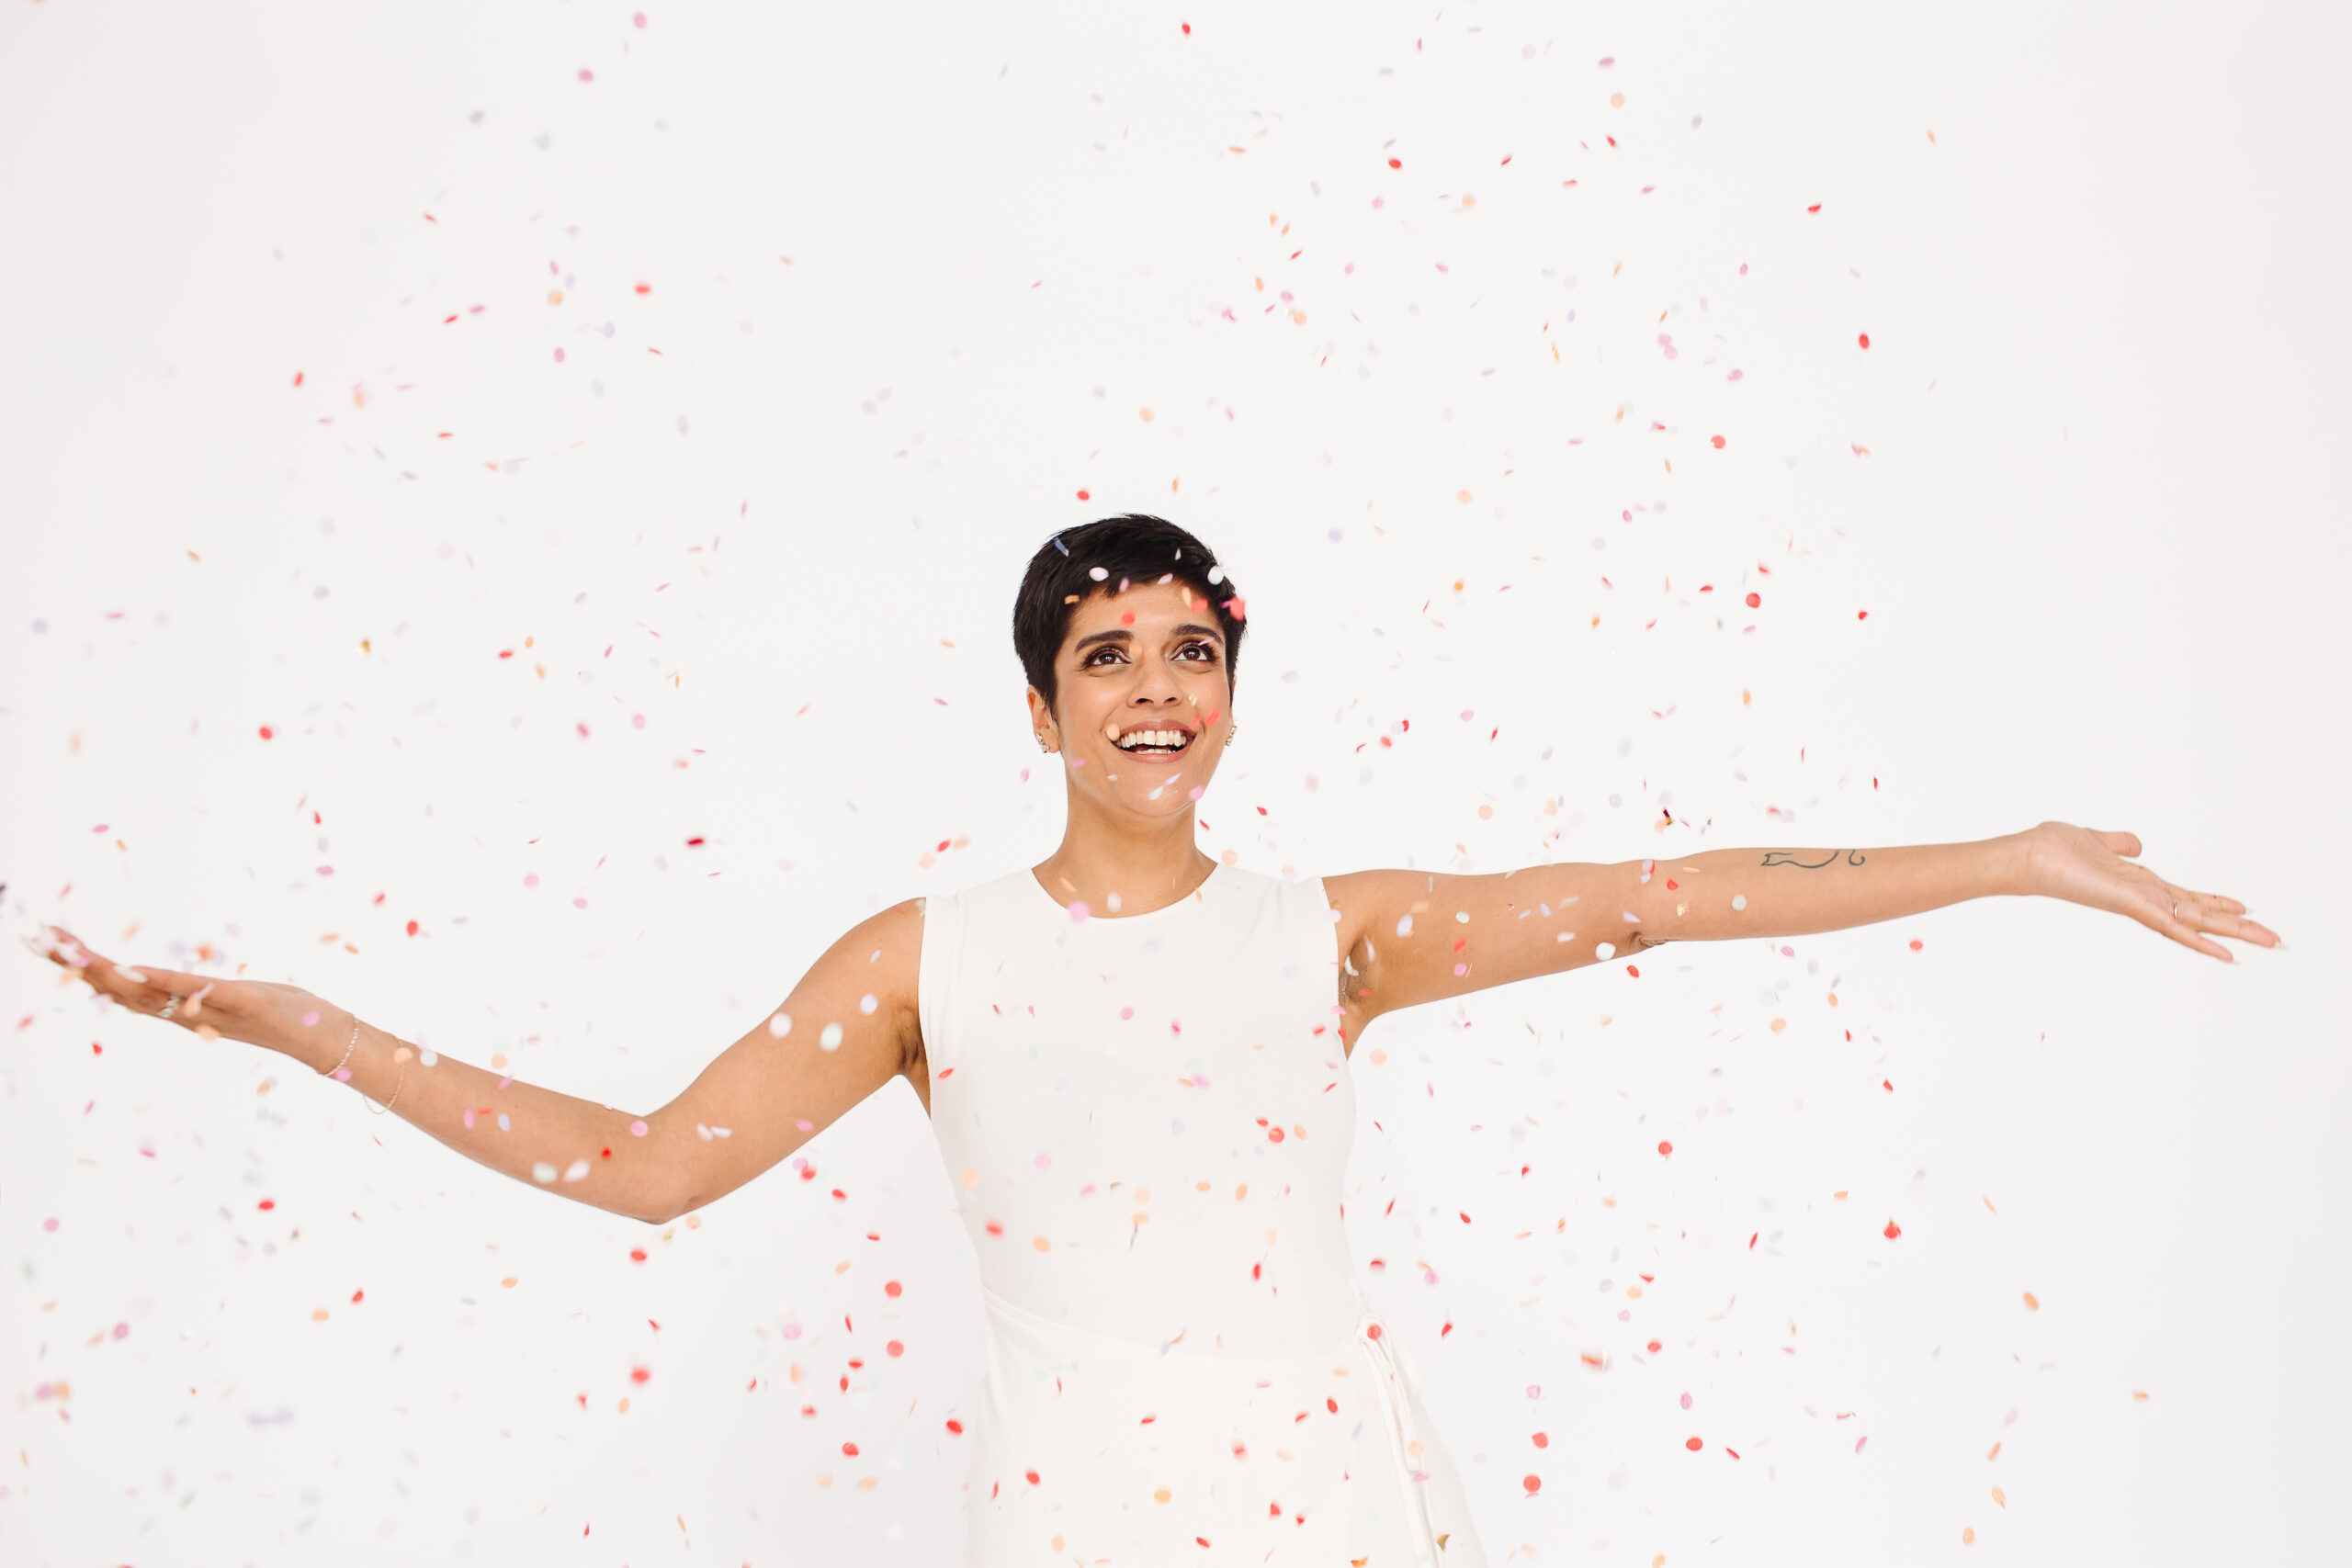 Radhika Graham from Rad Occasions is throwing confetti in the air